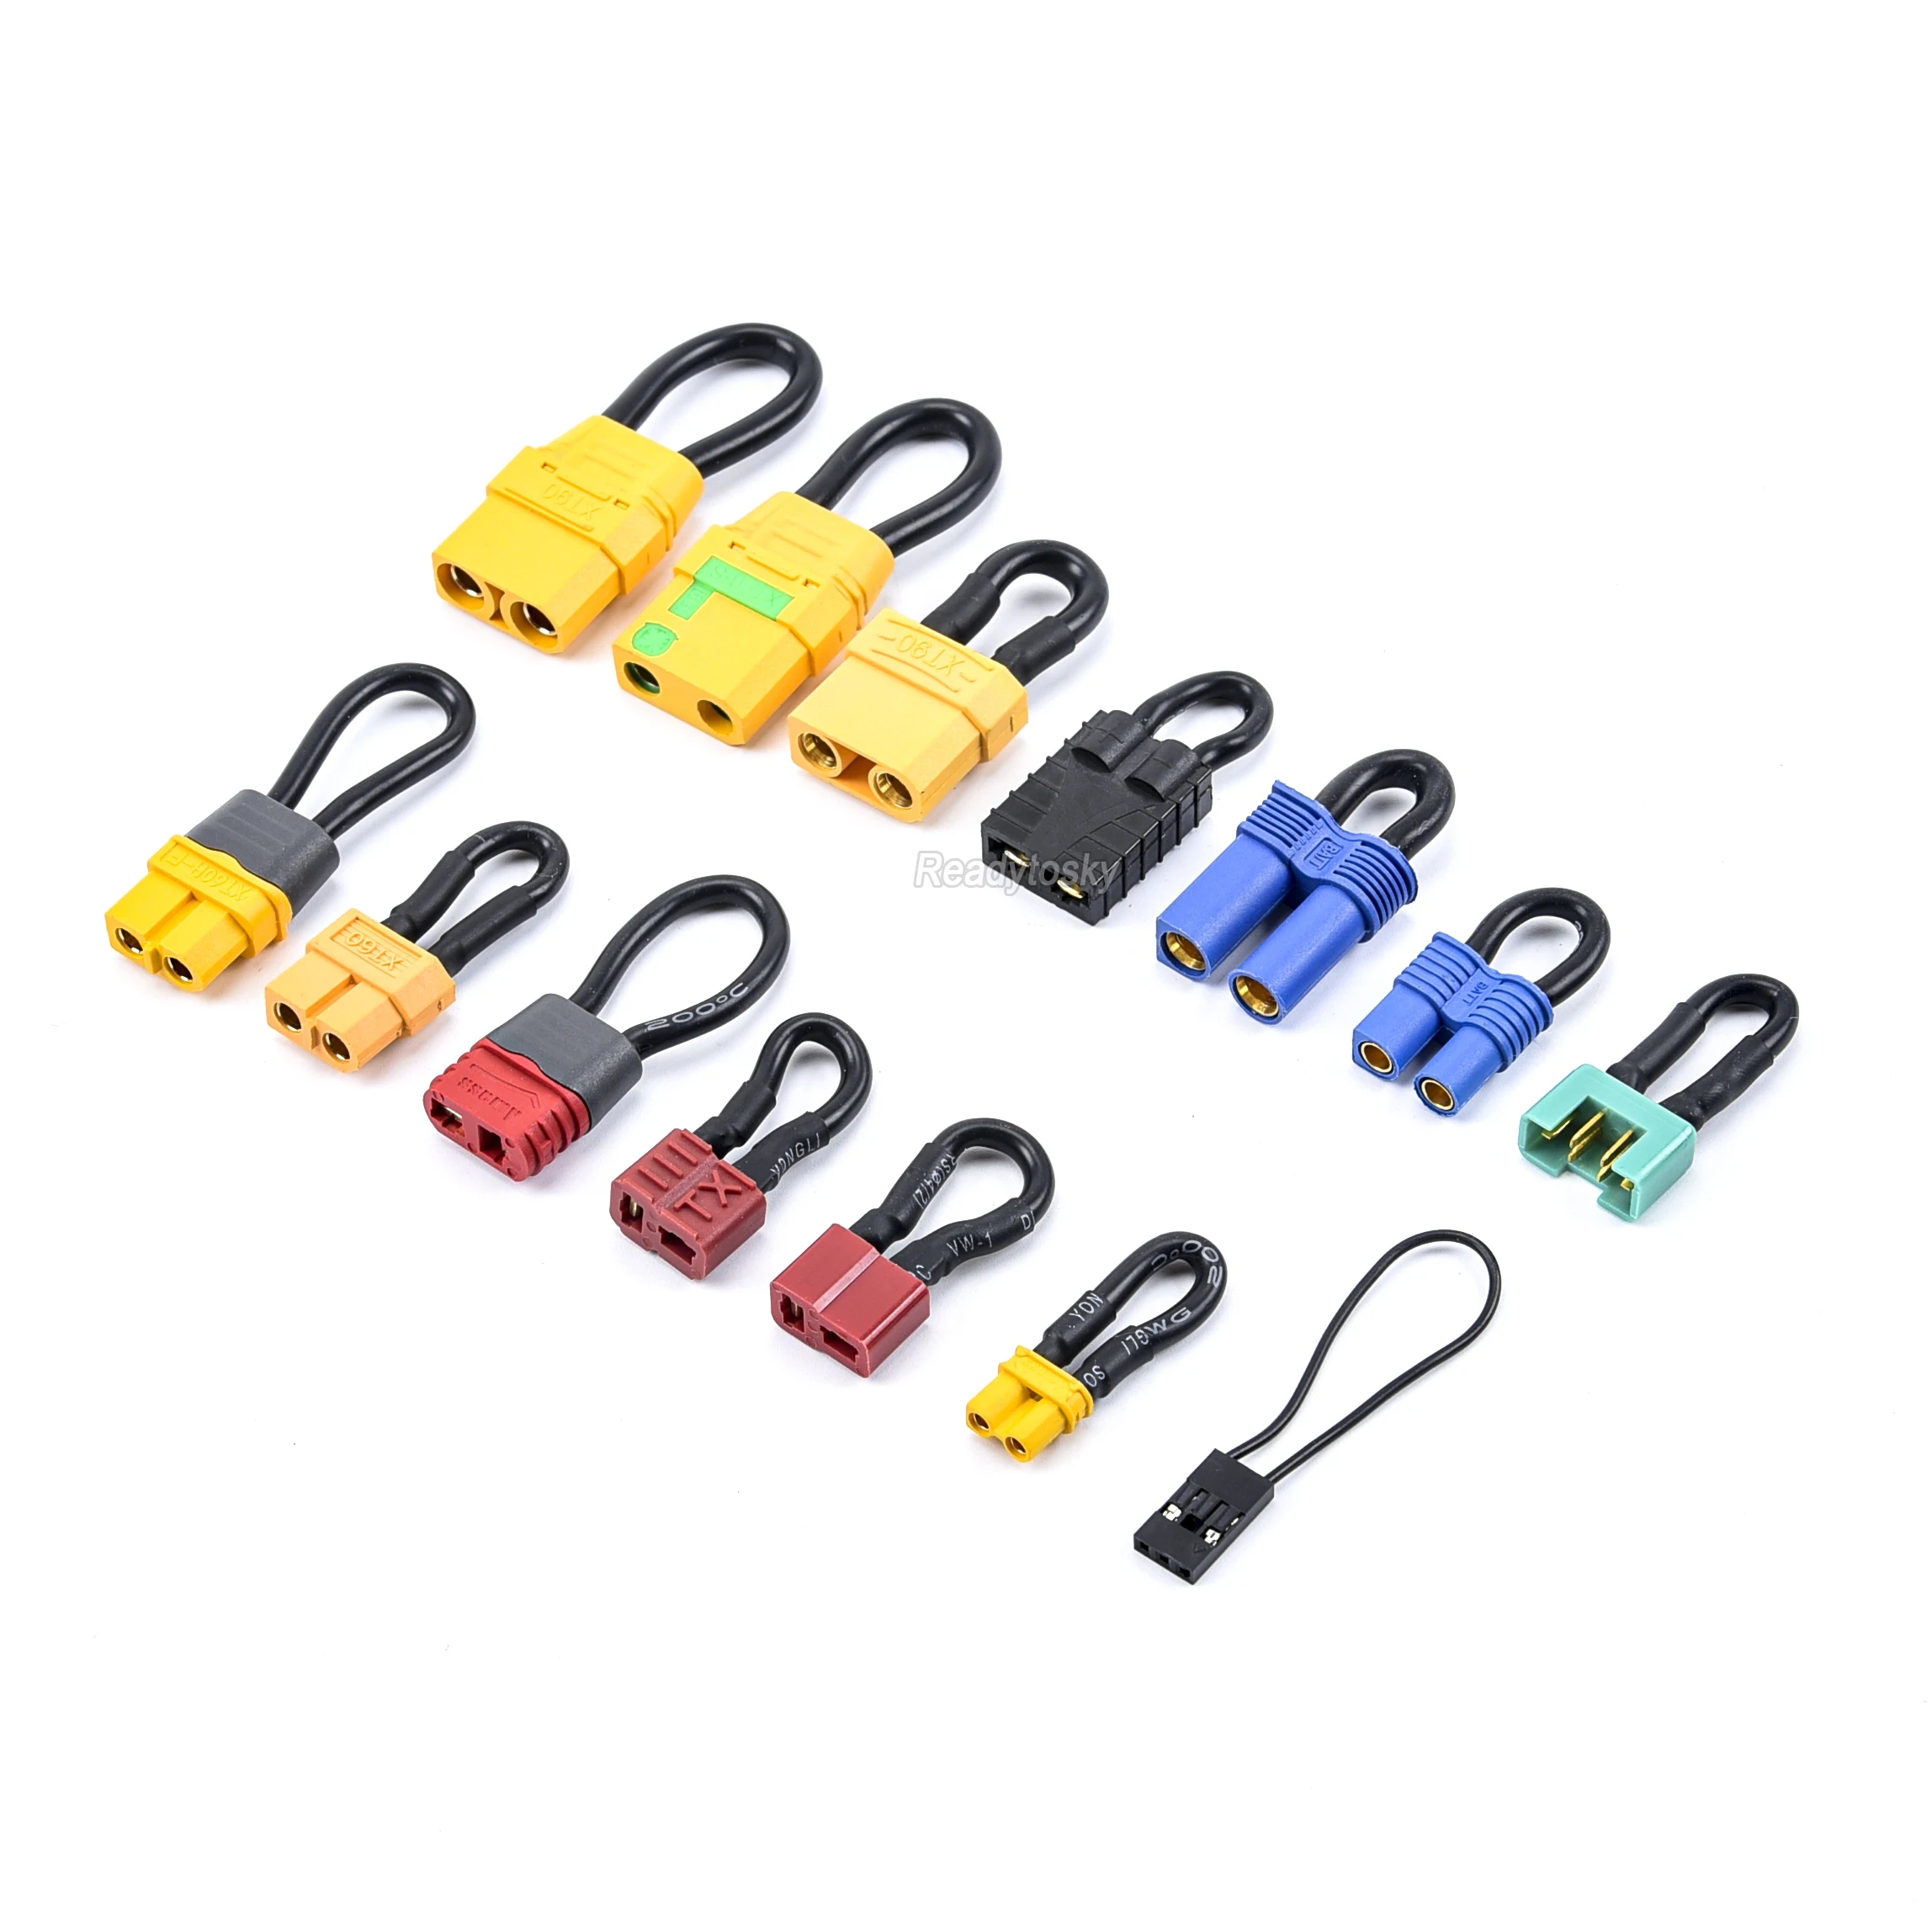 

1Pcs T Deans XT30 XT60 XT90 XT90S EC3 EC5 TRX JR MPX Plug for Bind Plug Loop Connector Short Circut battery Jumper Cable